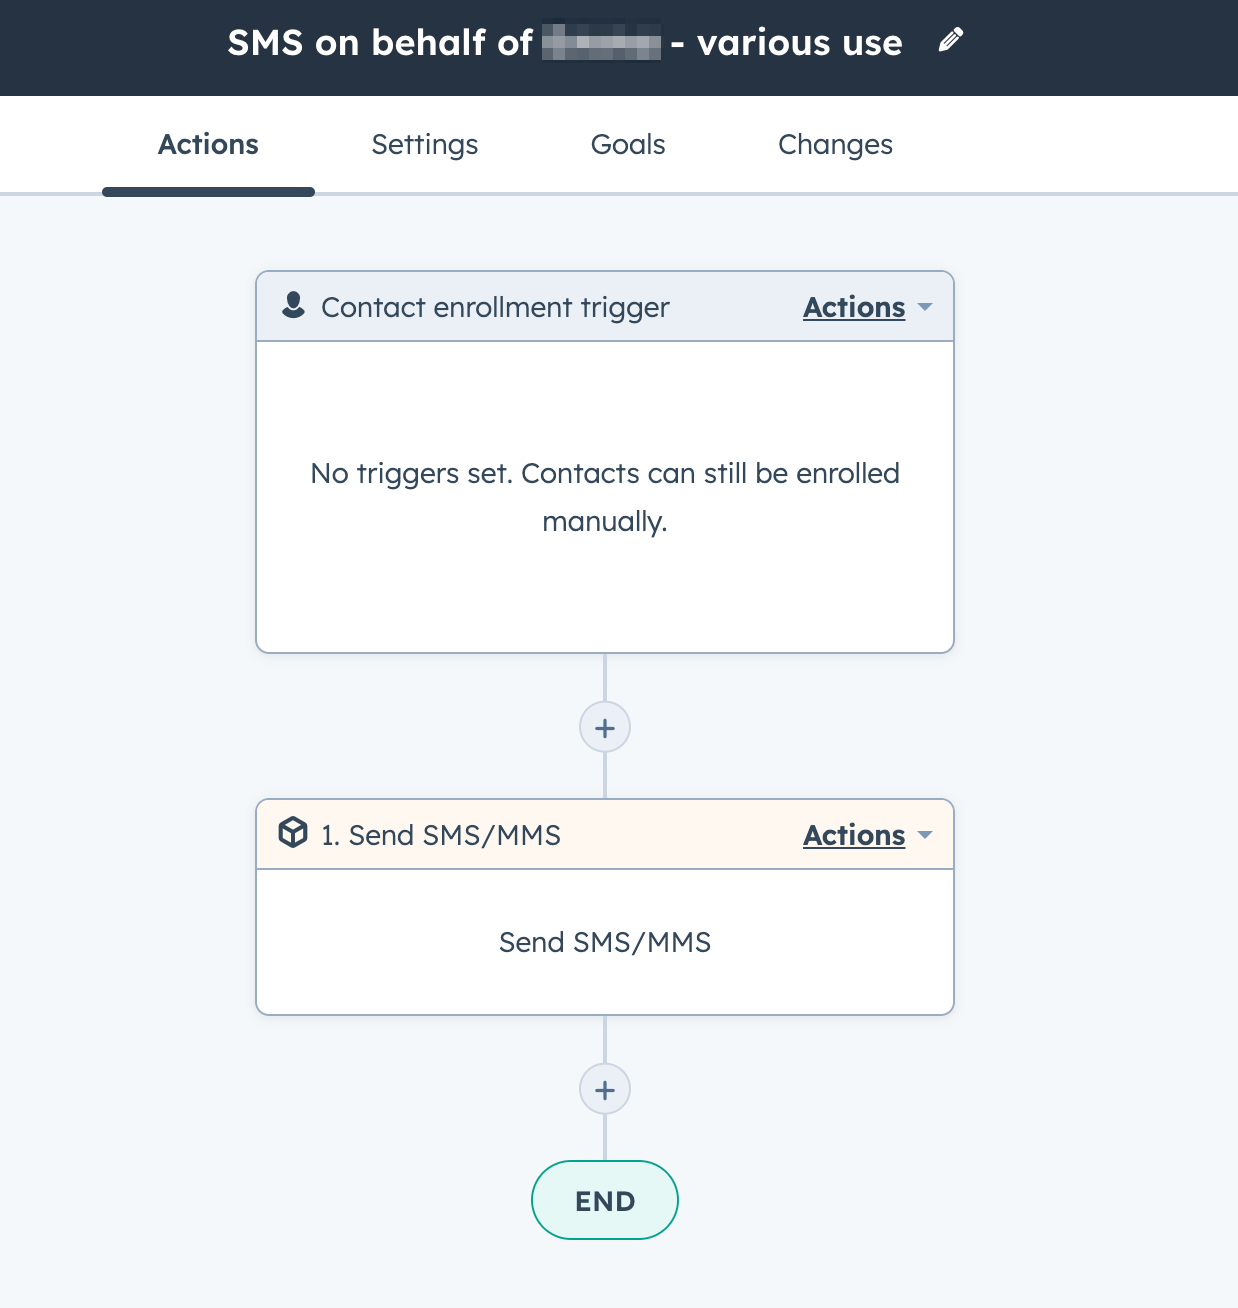 Manually triggering SMS to contacts from a workflow